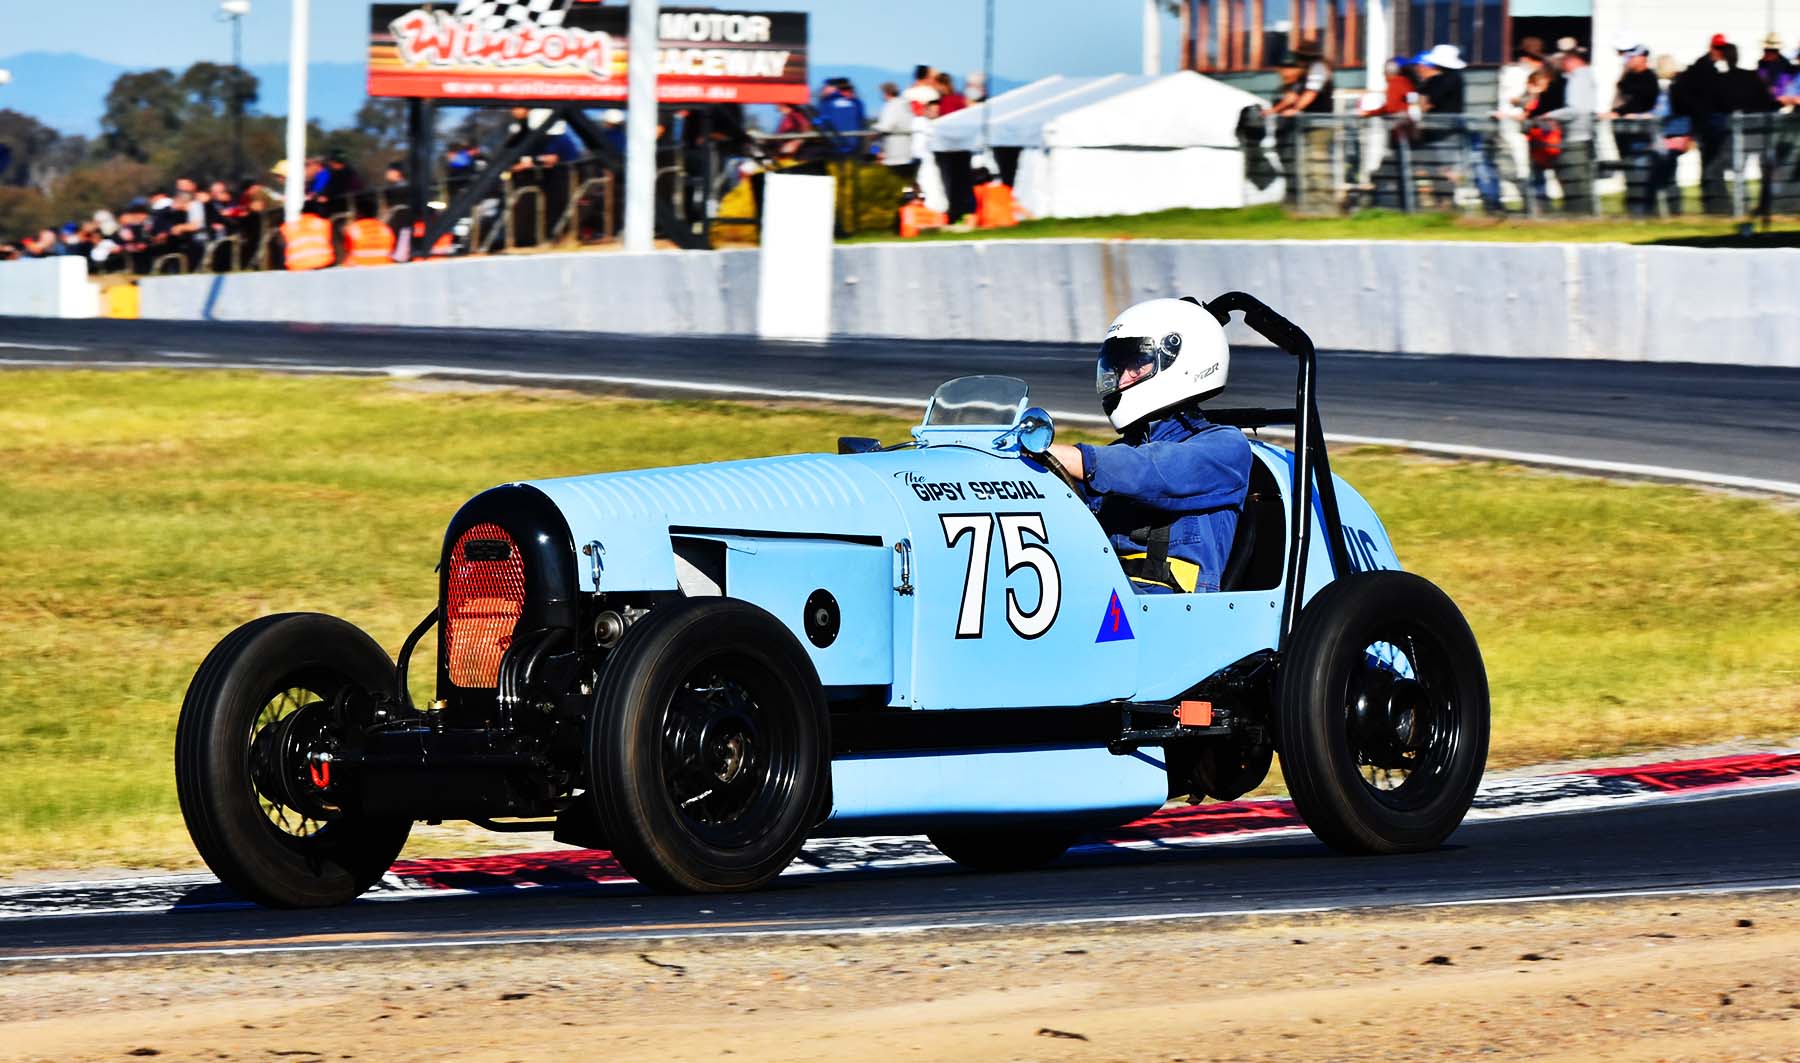 Vintage racing features at the Historic Winton race meeting